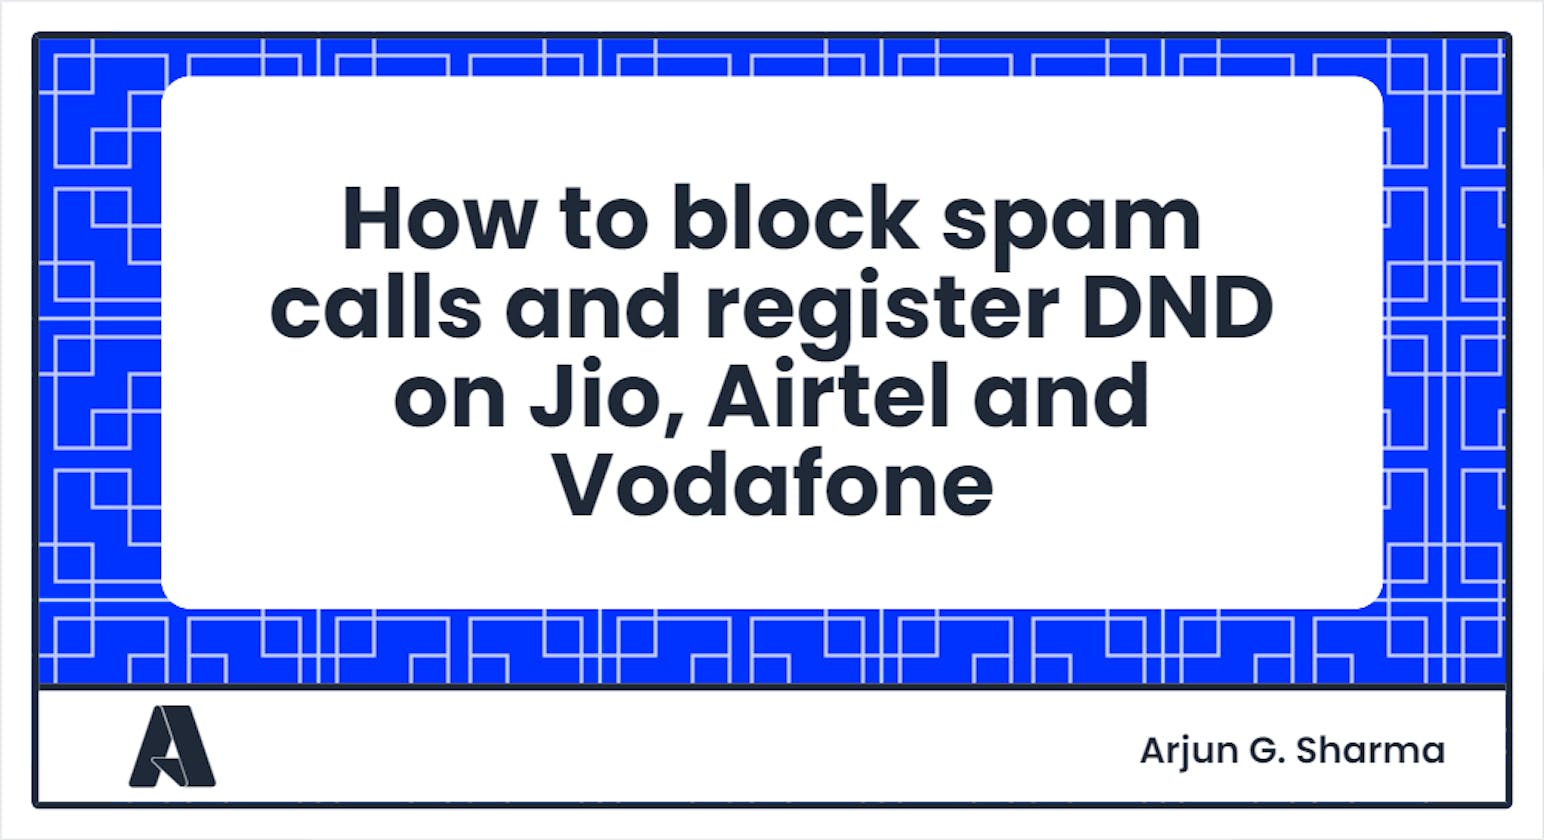 How to block spam calls and register DND on Jio, Airtel and Vodafone